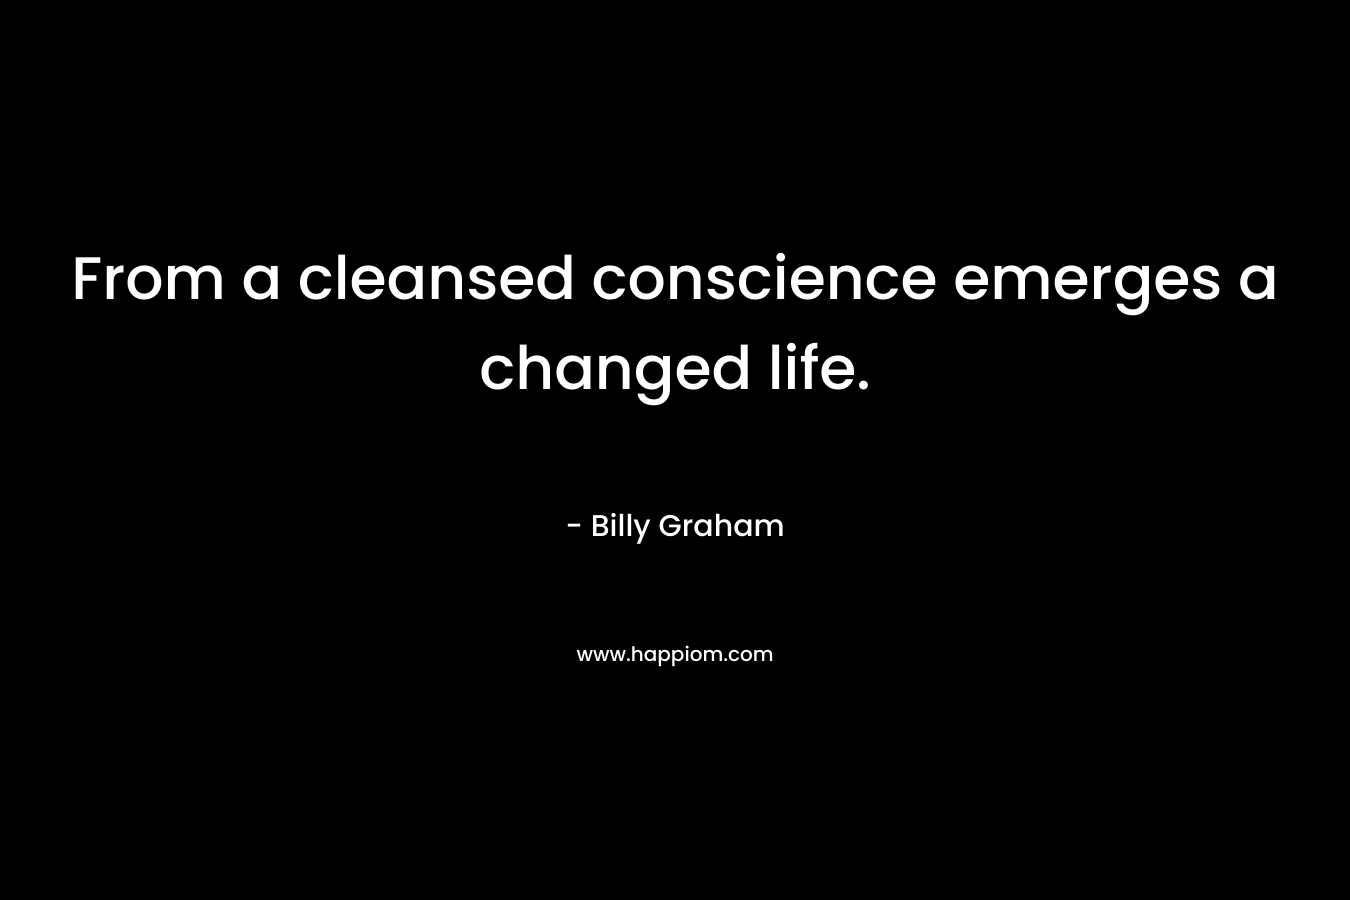 From a cleansed conscience emerges a changed life. – Billy Graham